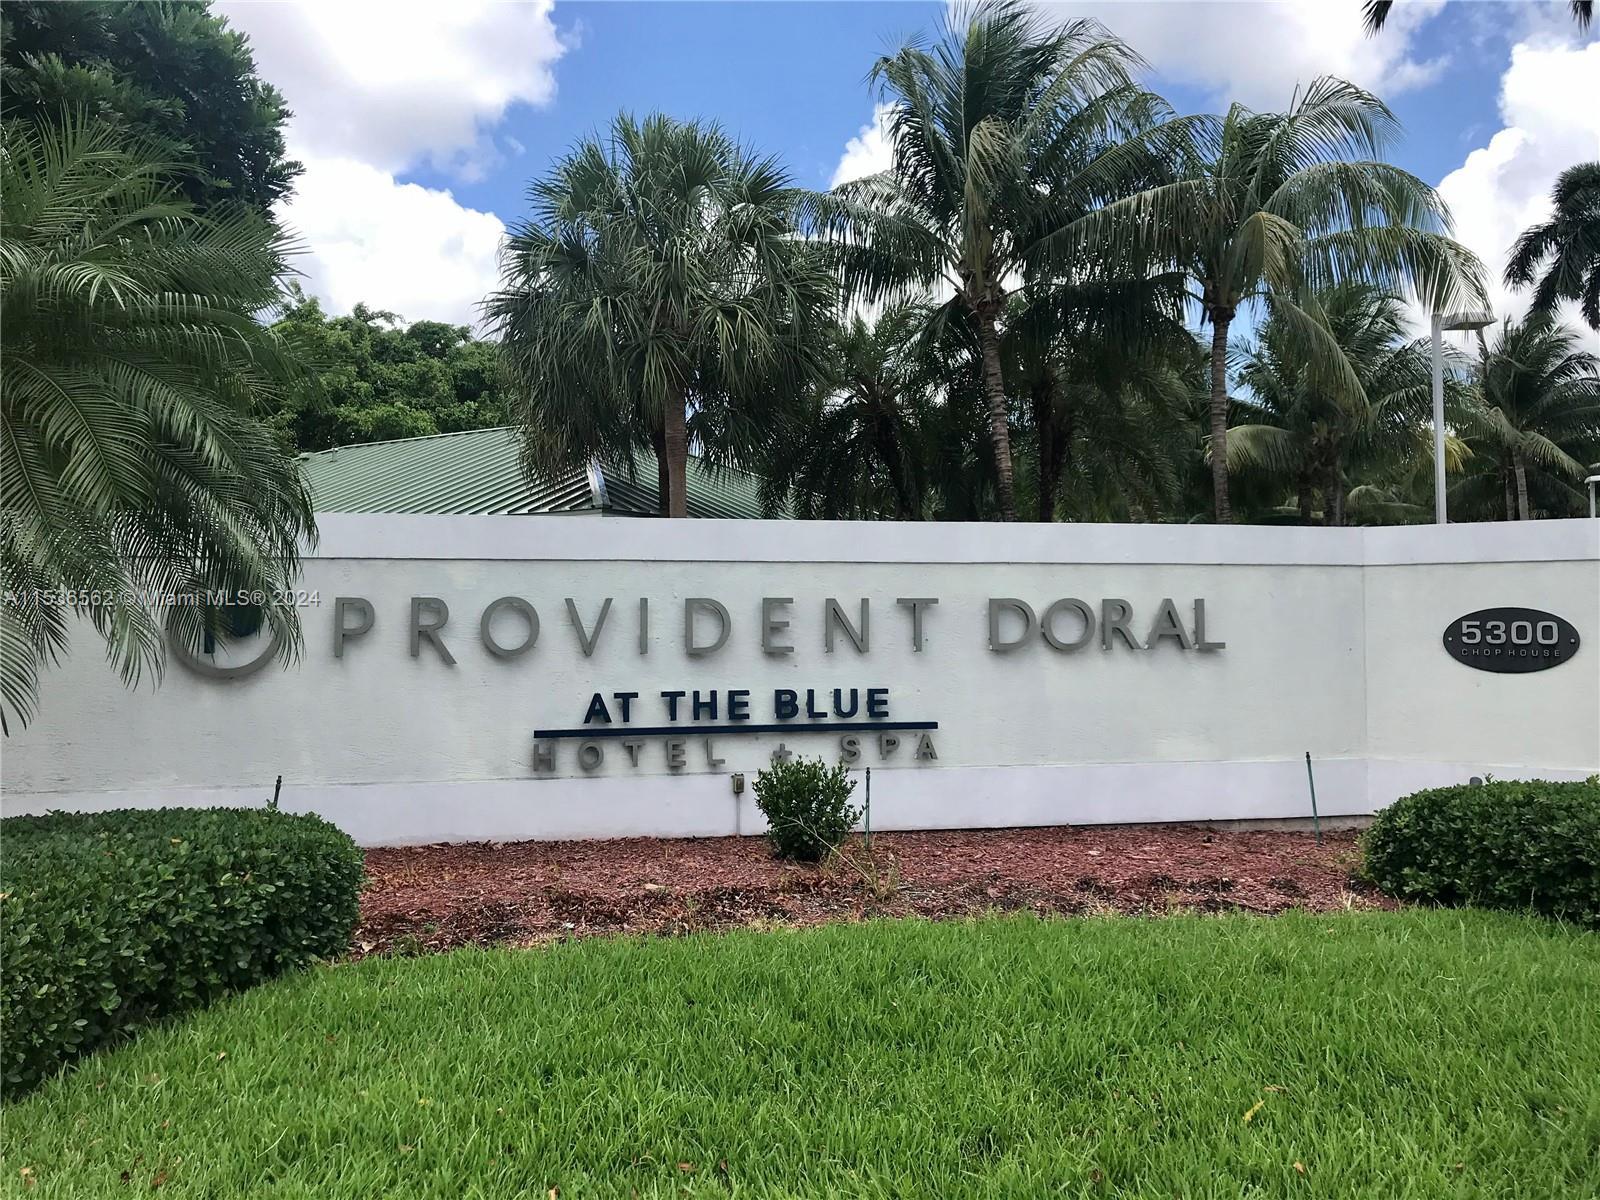 Photo of 5300 NW 87th Ave #302 in Doral, FL